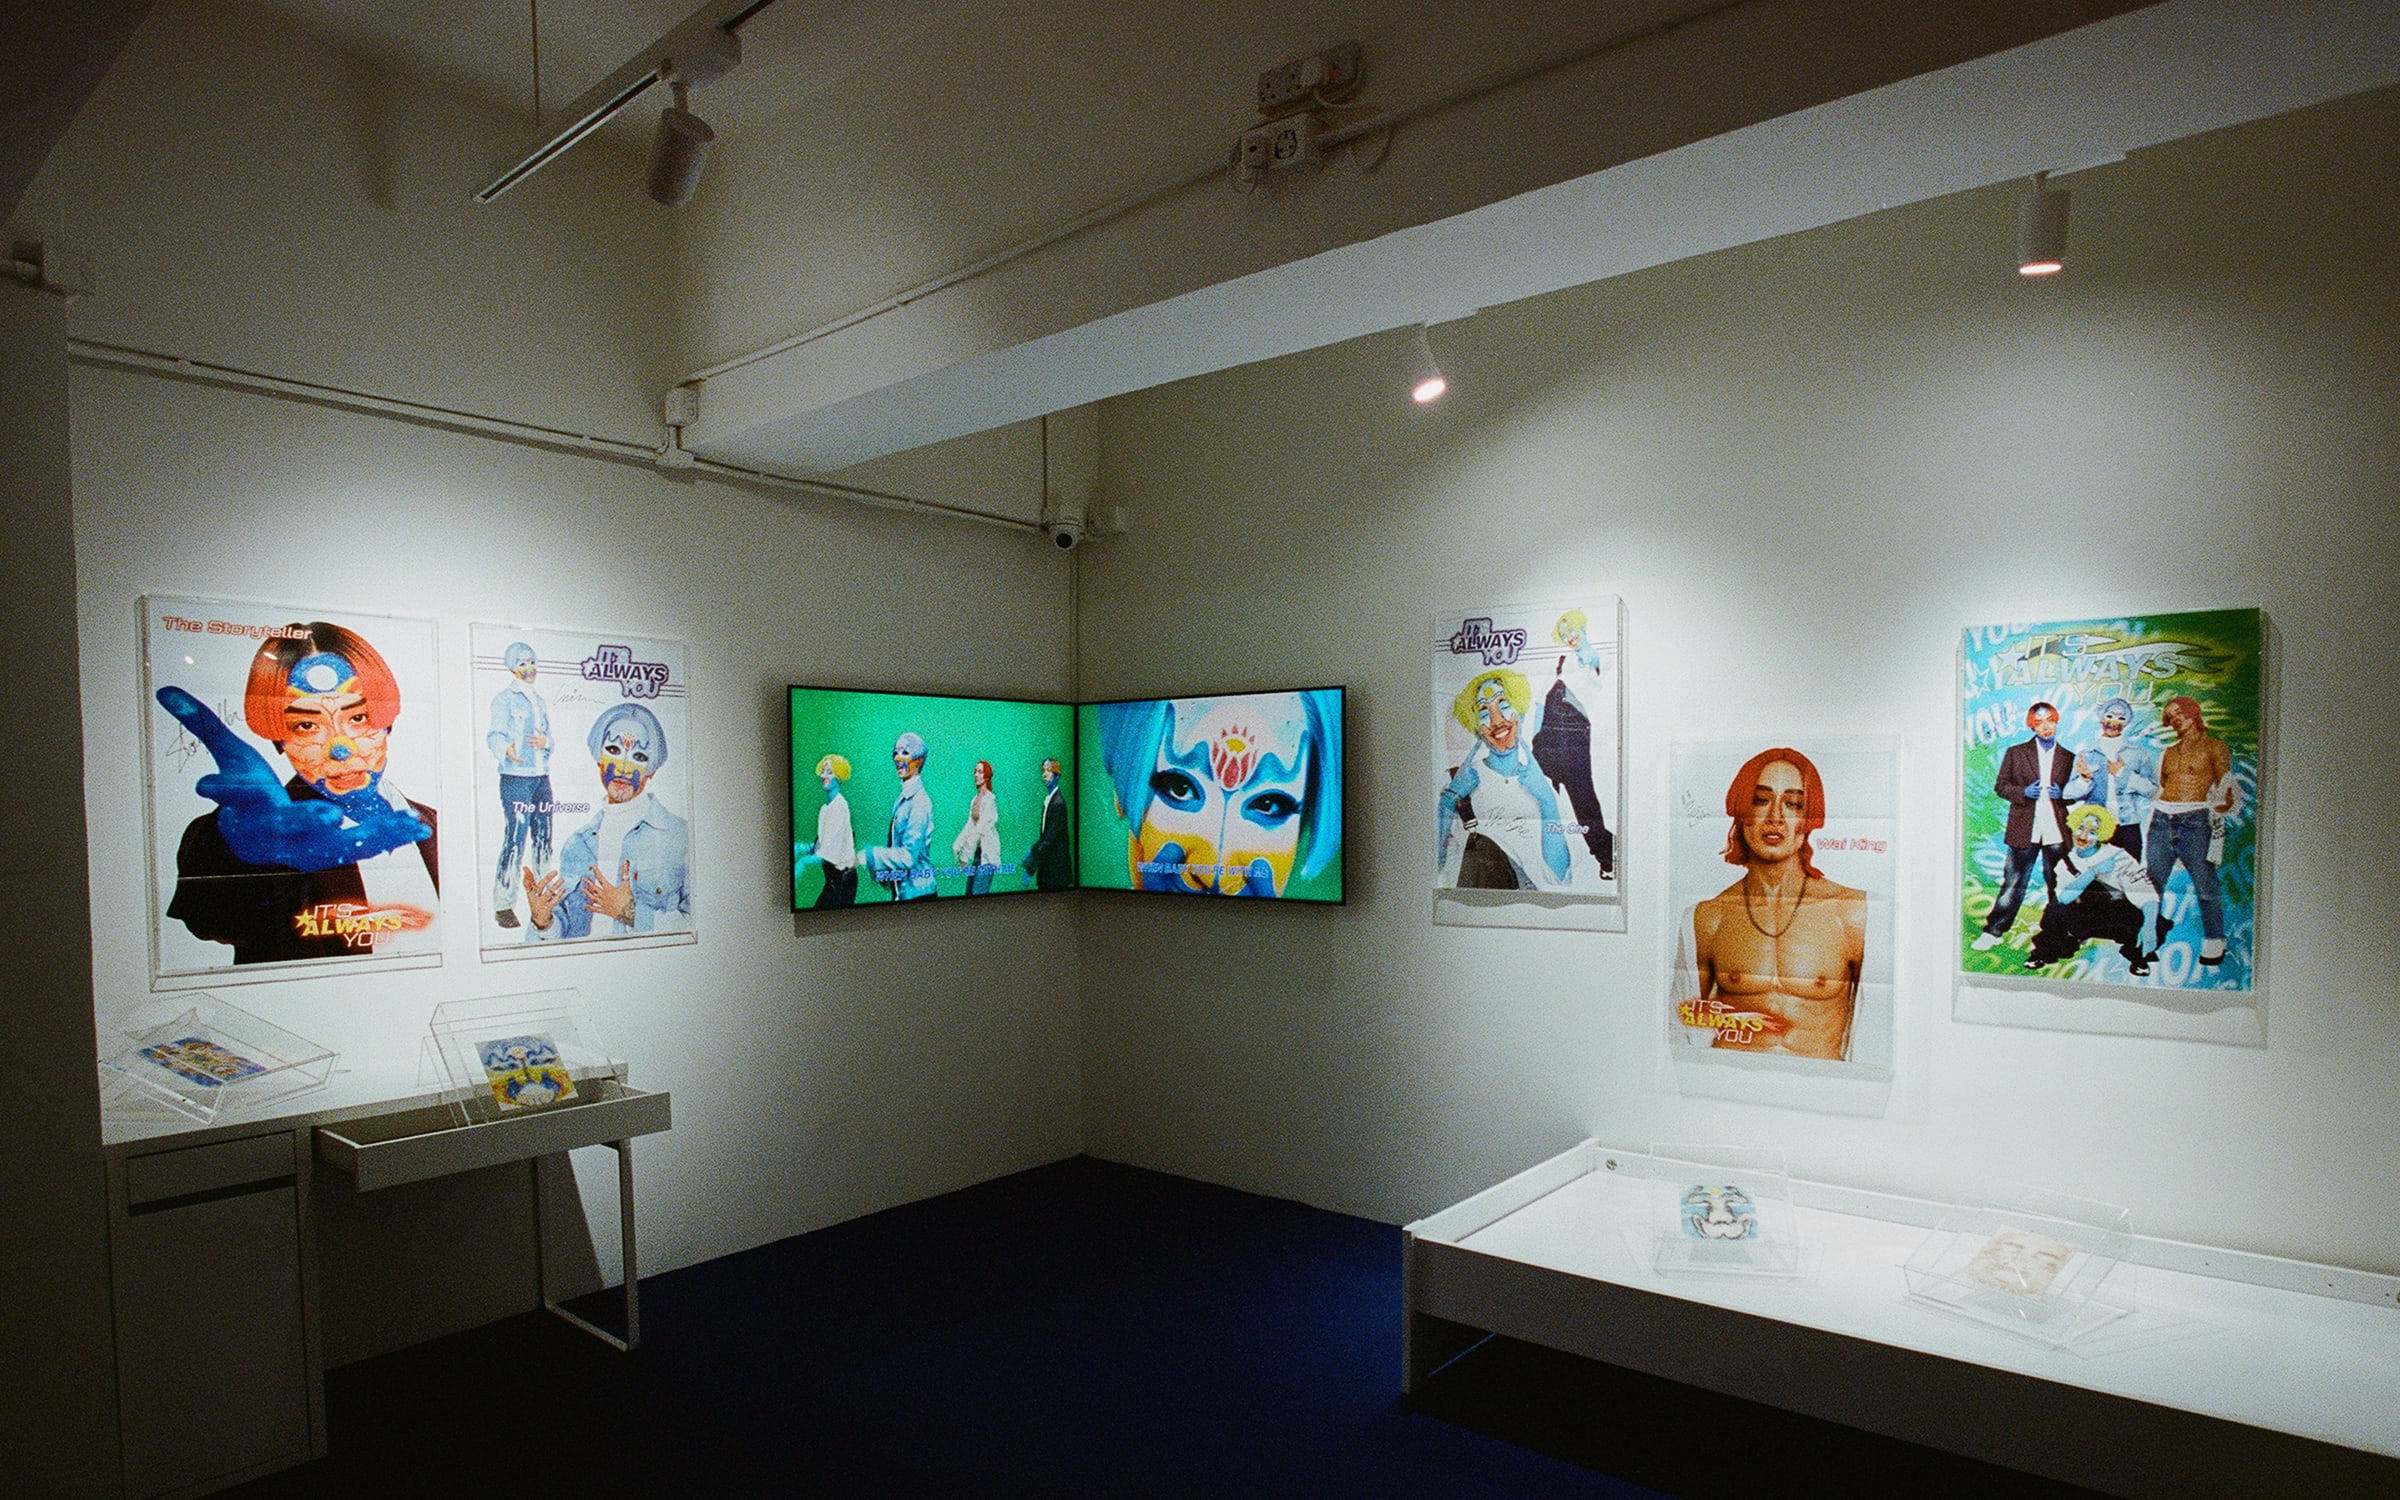 Installation view at Para Site. Photograph by Luke Casey for Art Basel.